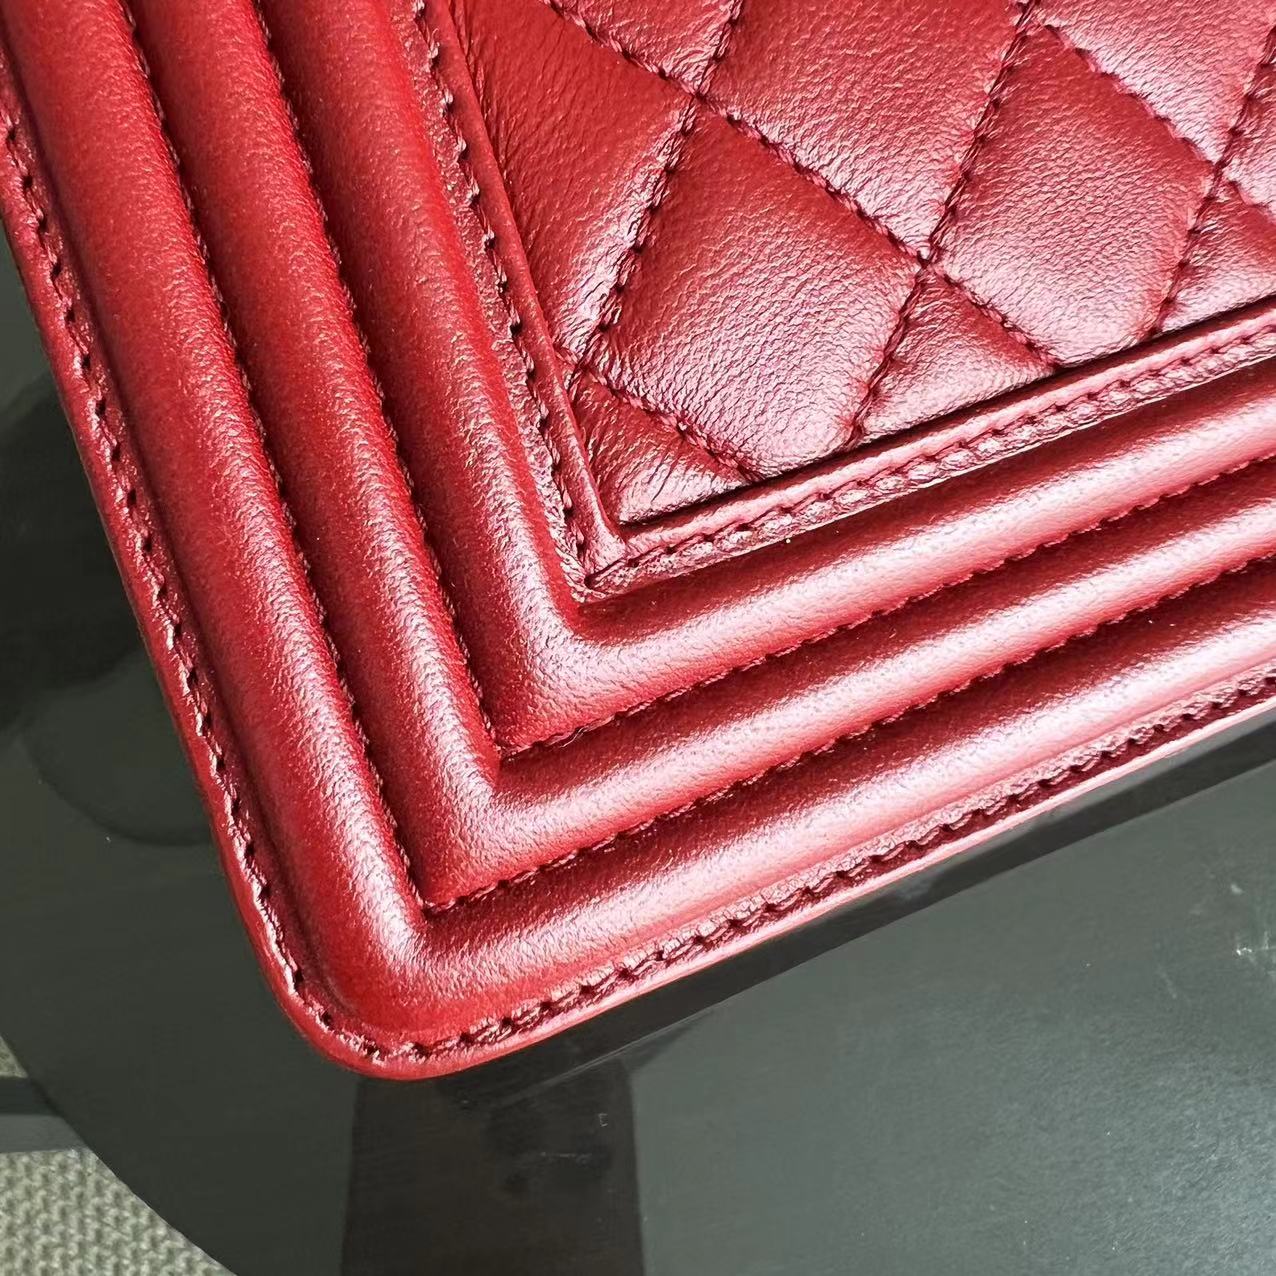 Chanel Boy Old Medium Quilted Lambskin Leboy Red RSHW No 18